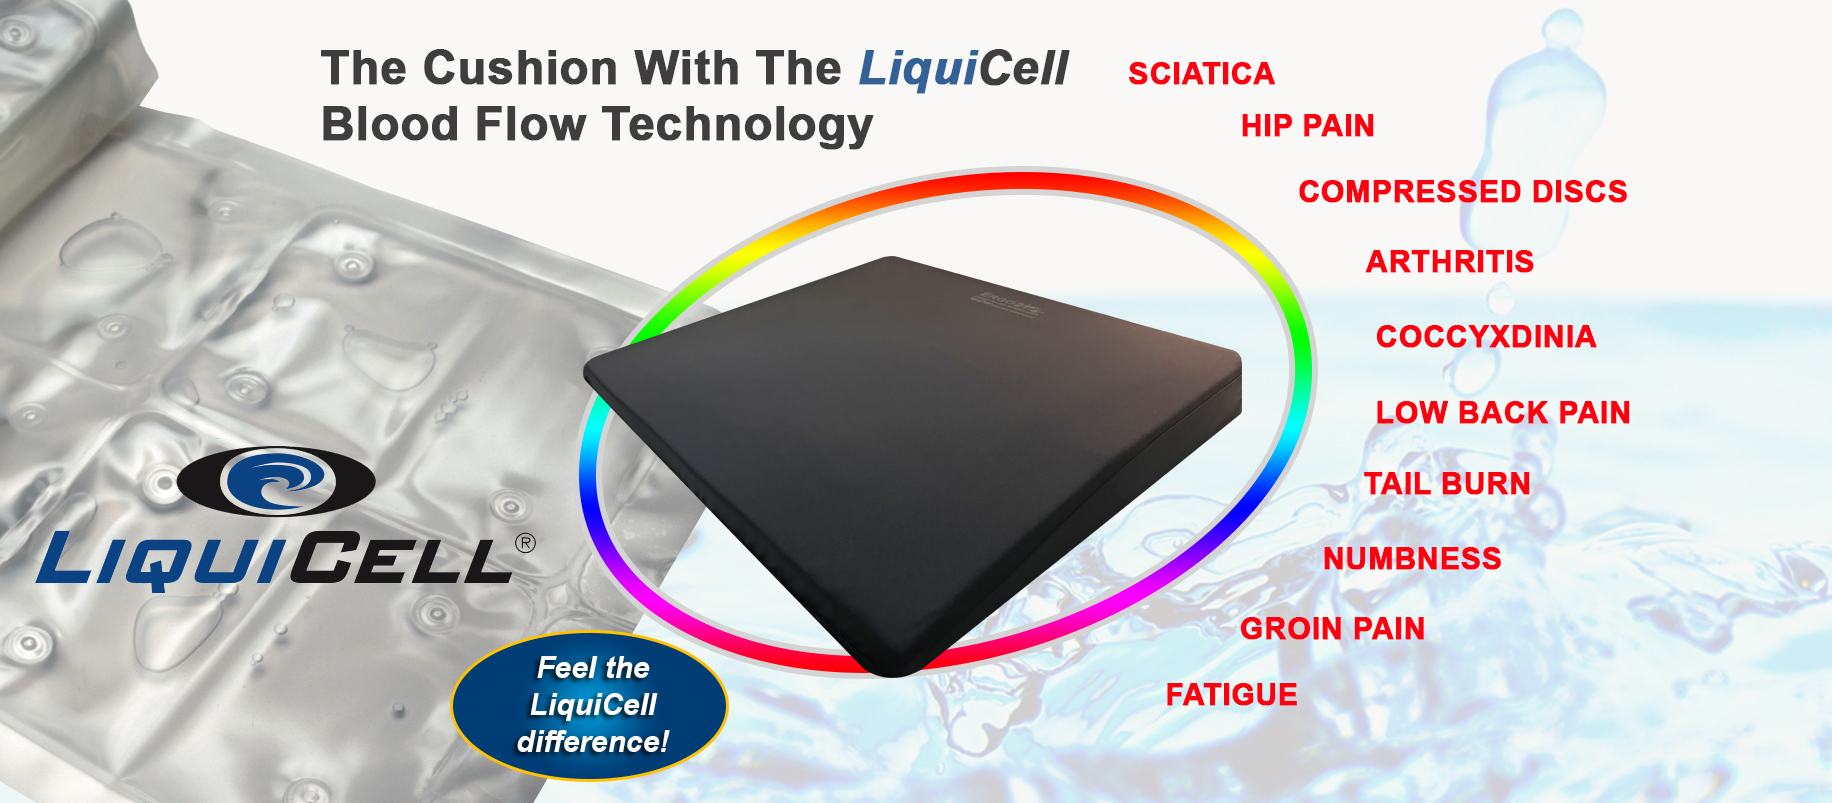 Best Cushion With LiquiCell Technology